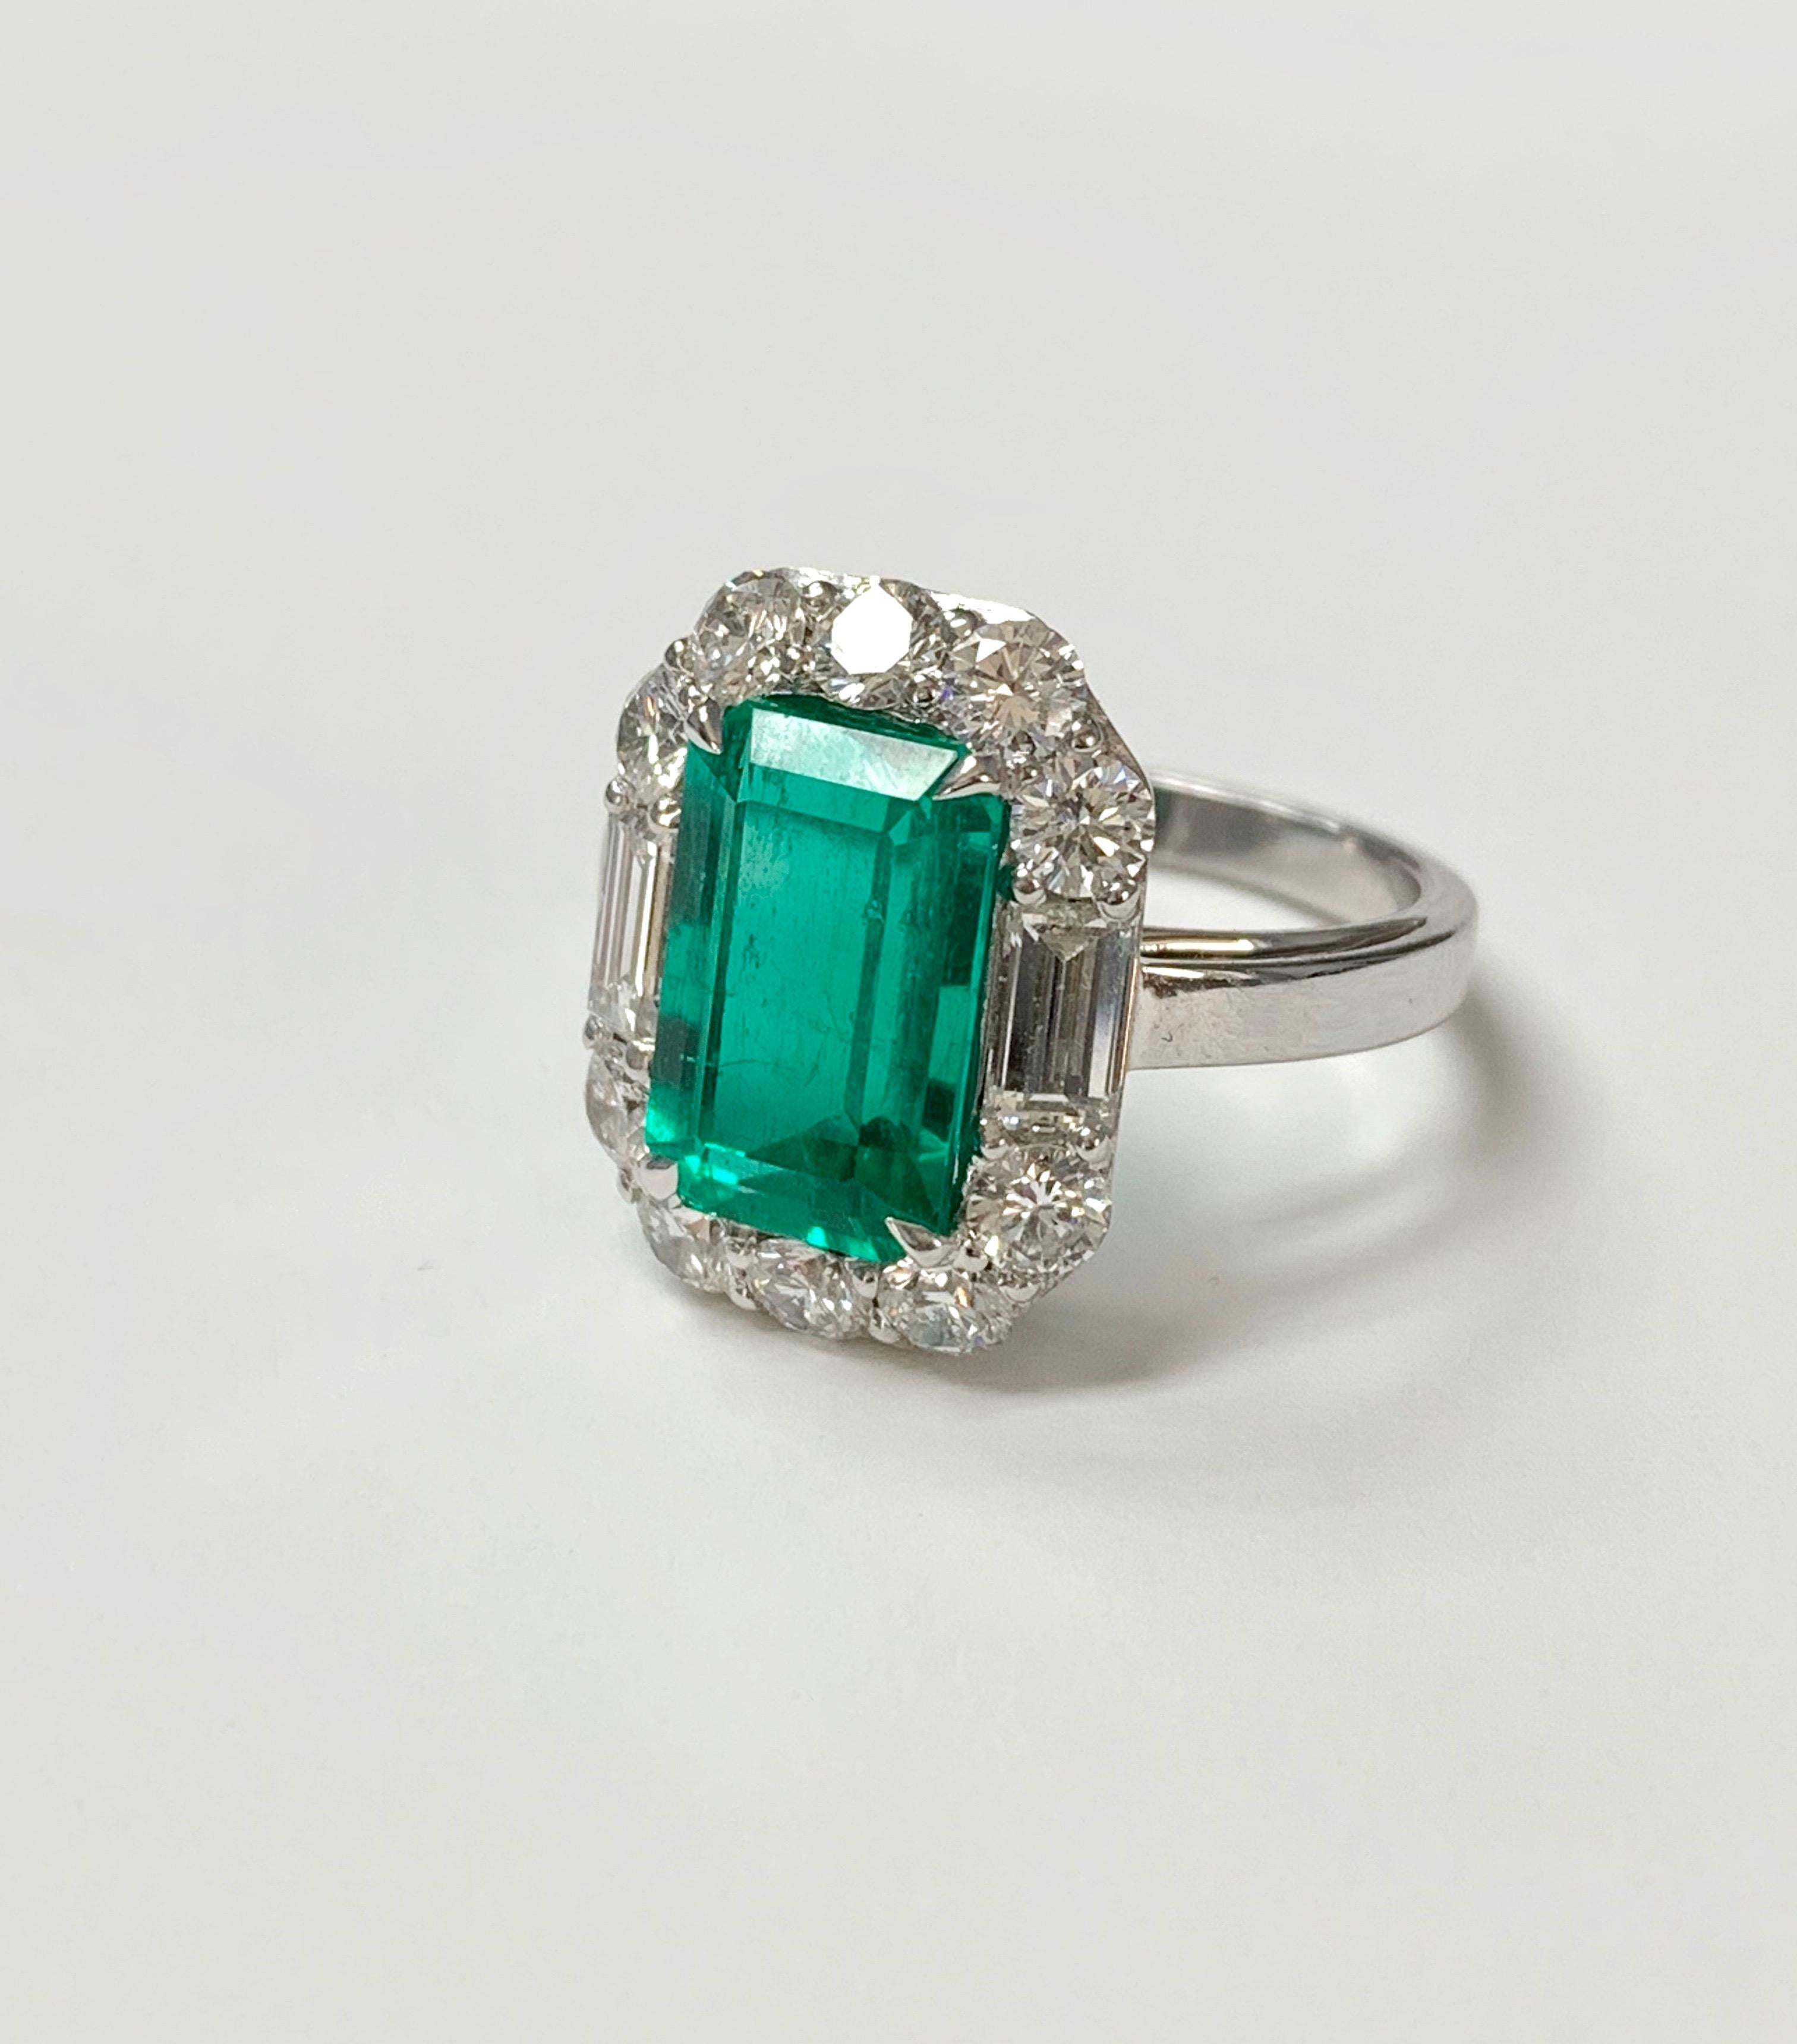 GIA Certified 3.63 Carat Colombian Emerald and Diamond Ring in 18k White Gold 2